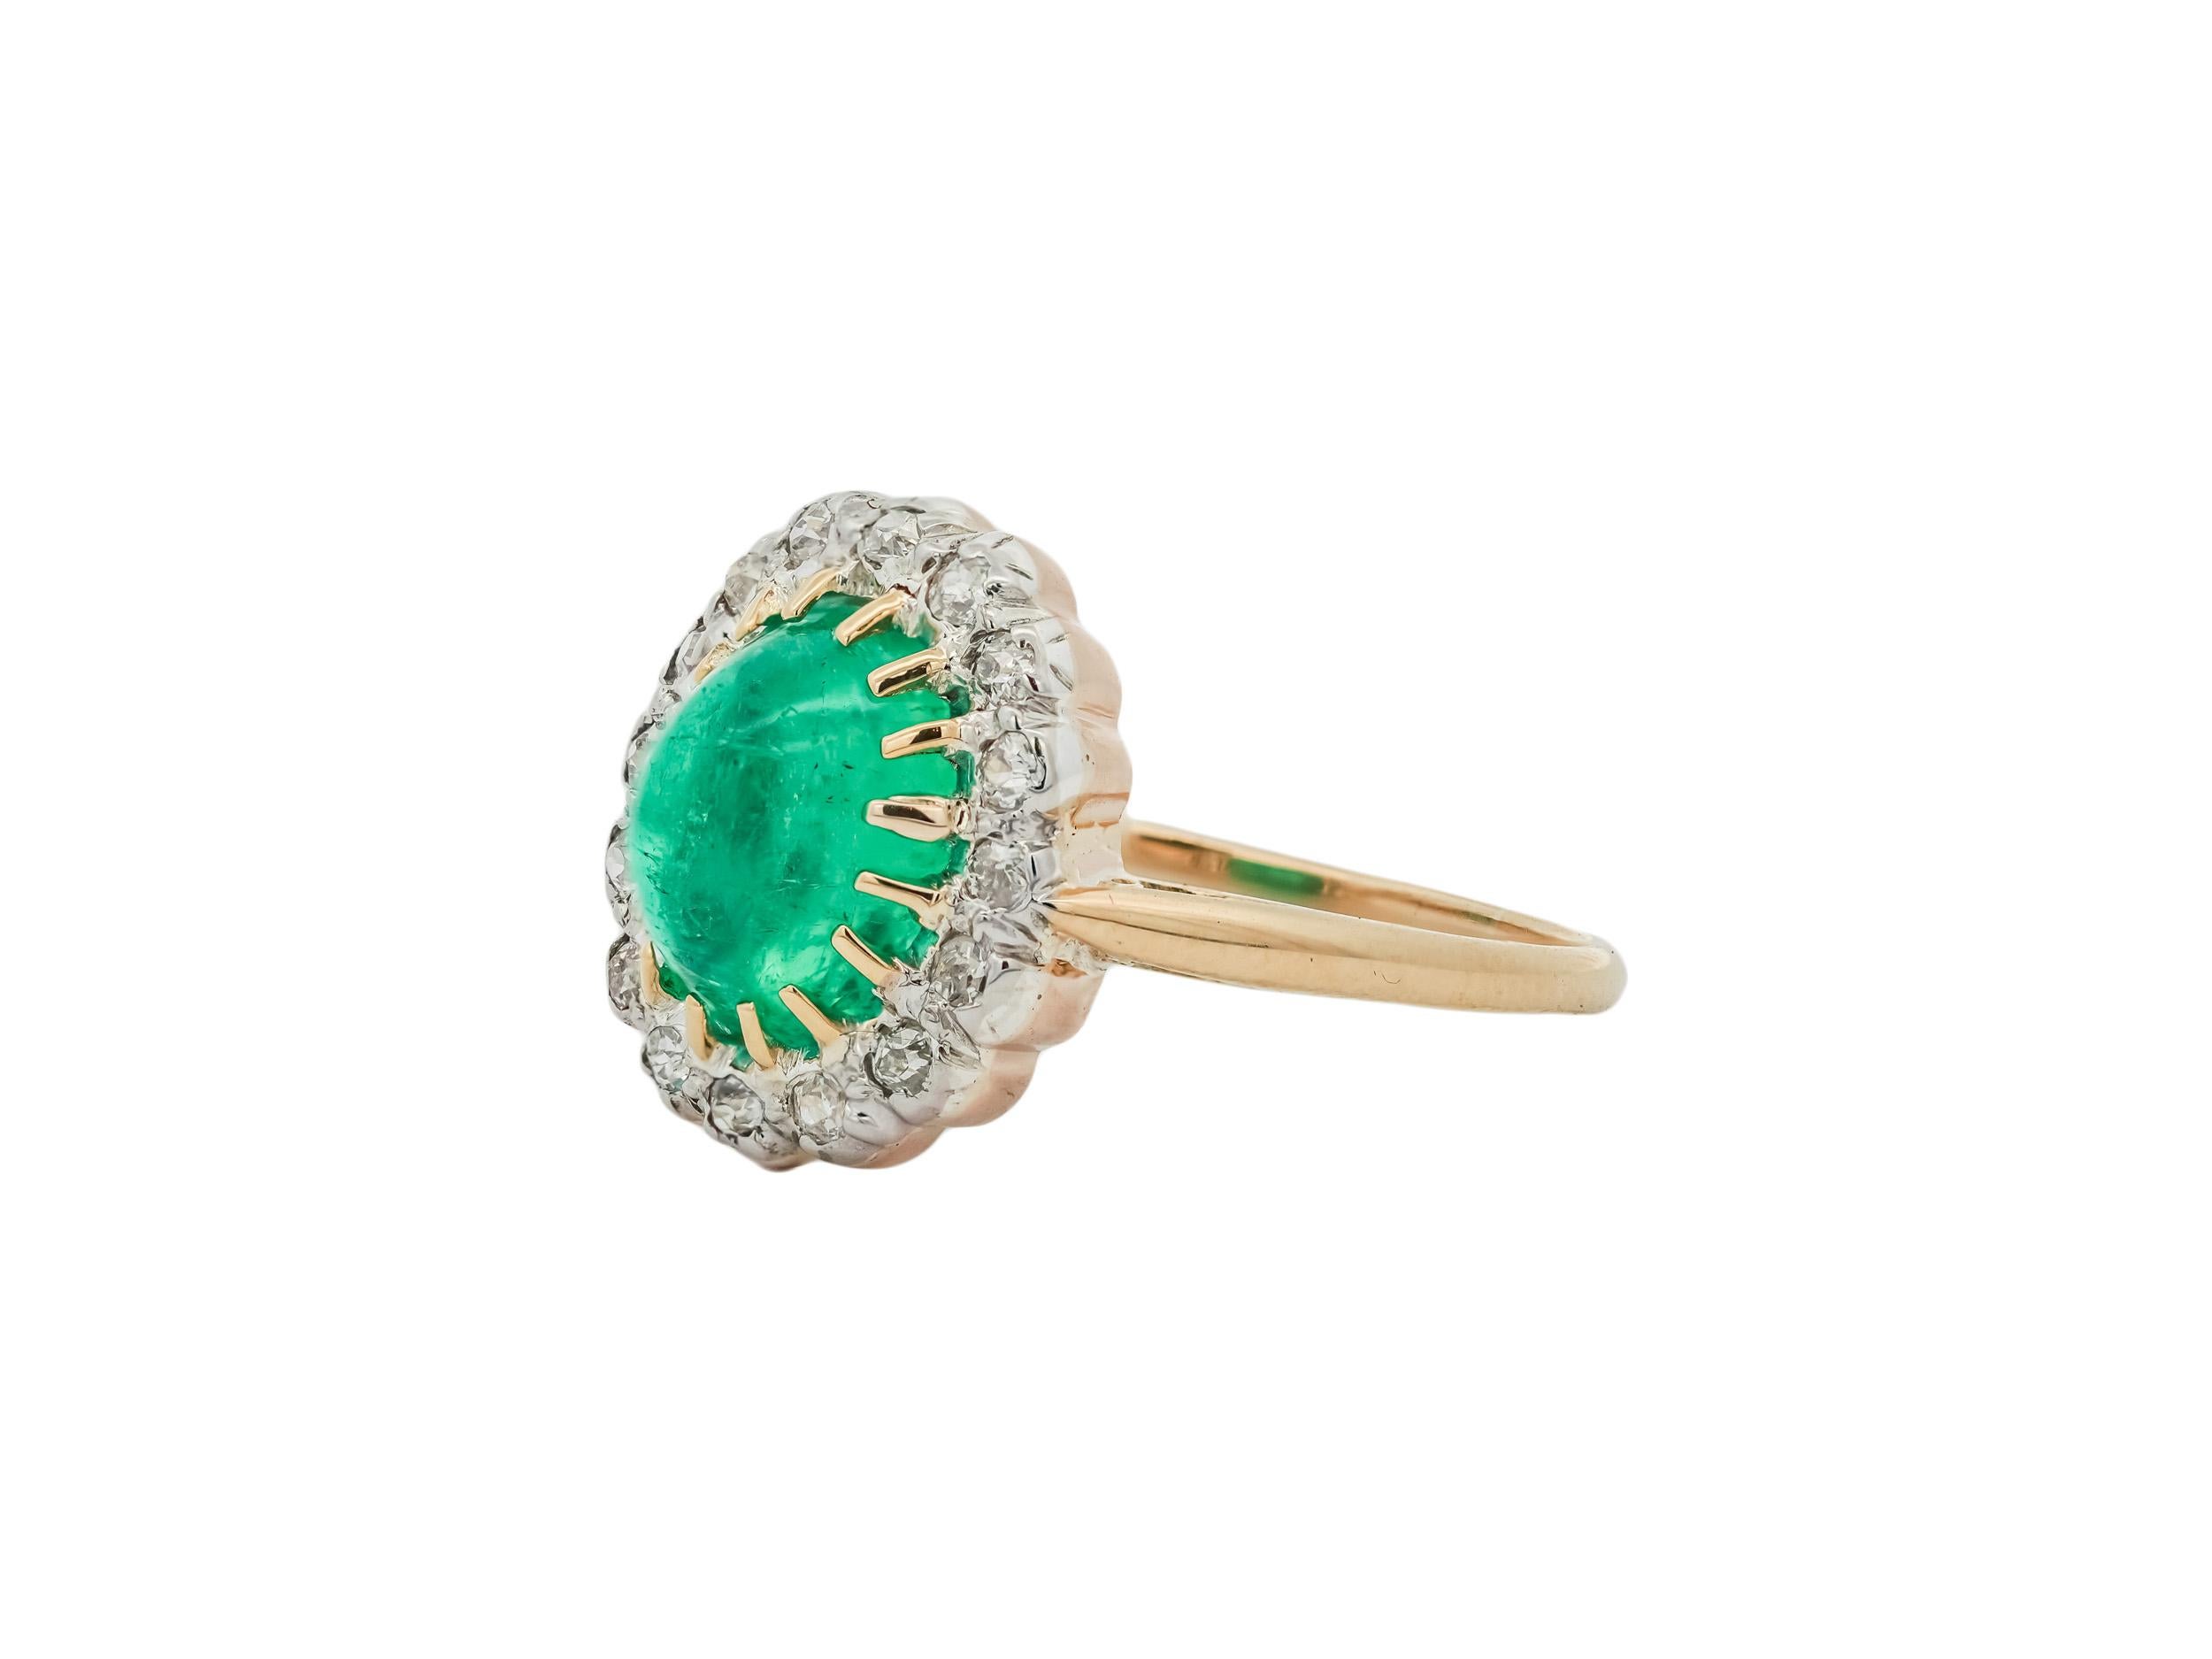 Era: Late Victorian to Early Edwardian c. 1895-1905

Metal: Platinum and 14K Yellow Gold

Stones: 

Emerald Total Carat Weight: 2.30 Carats
Diamond Total Carat Weight: 0.25 Carats
Measurements: 

Length: 14.4 mm 
Width: 12.4 mm 
Shank Width: 1.5 mm